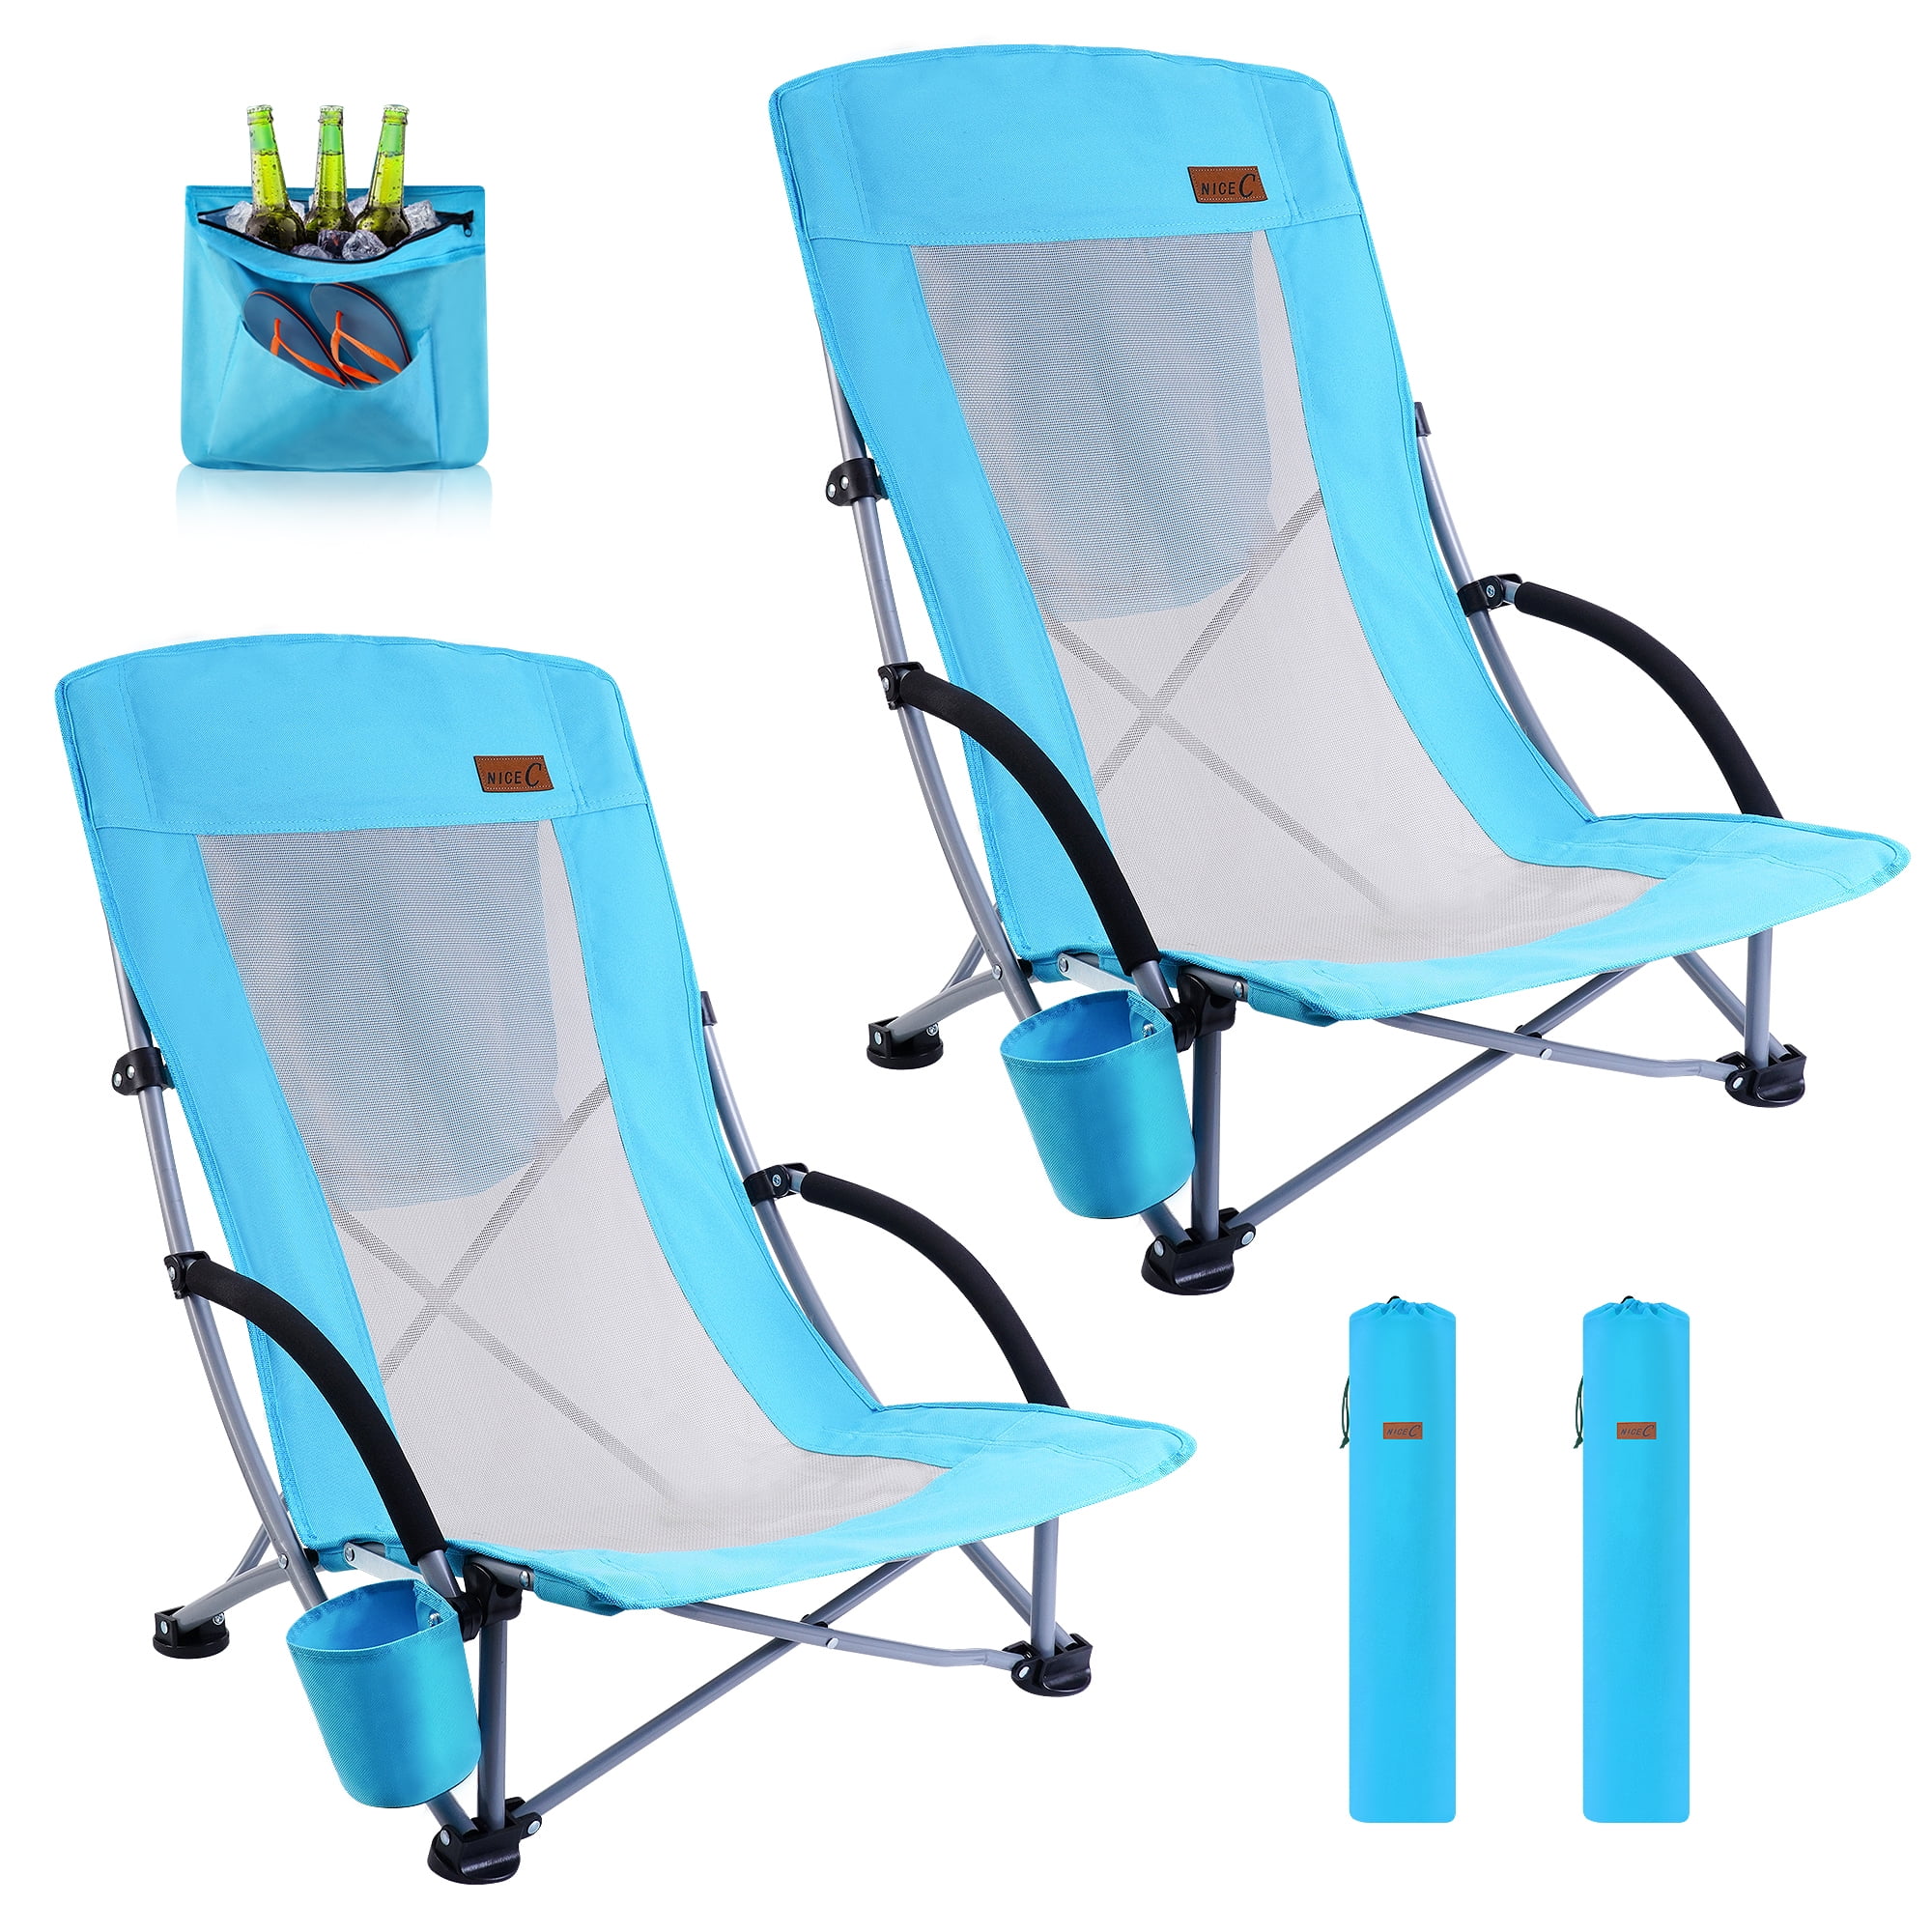 KingCamp Folding Camping Chair for Adults Portable Lightweight Soccer Chairs Outdoor Lawn Beach Picnic Chair with Arm Rest Cup Holder and Carry Bag 